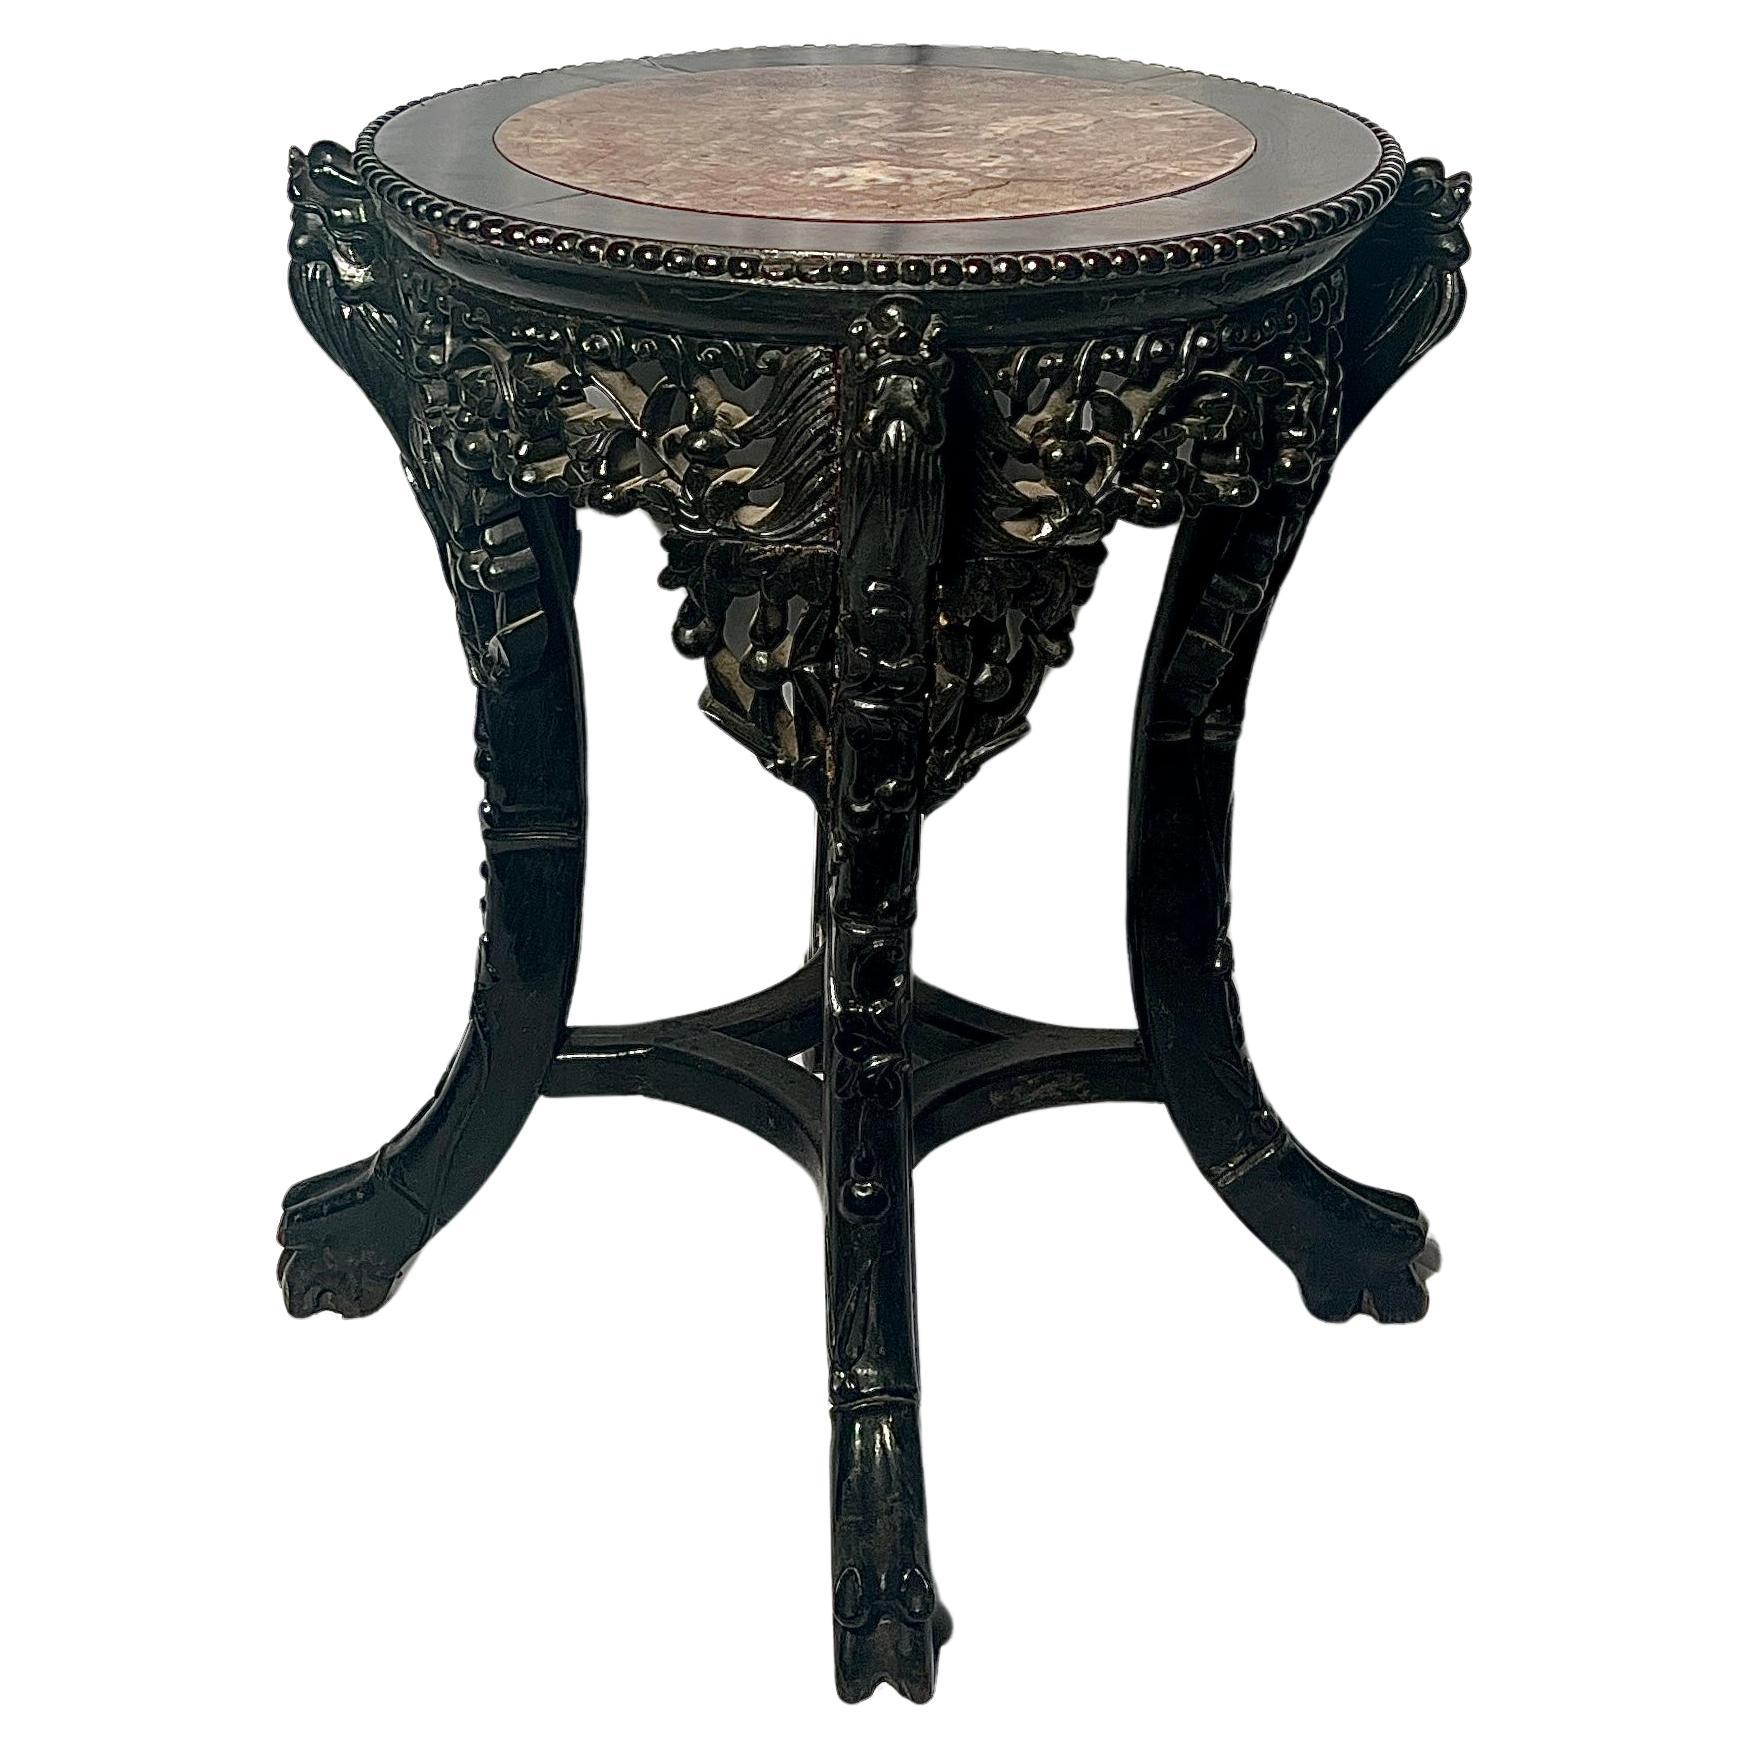 Antique Oriental Carved Teak Wood Marble Top Stand, Circa 1900's.